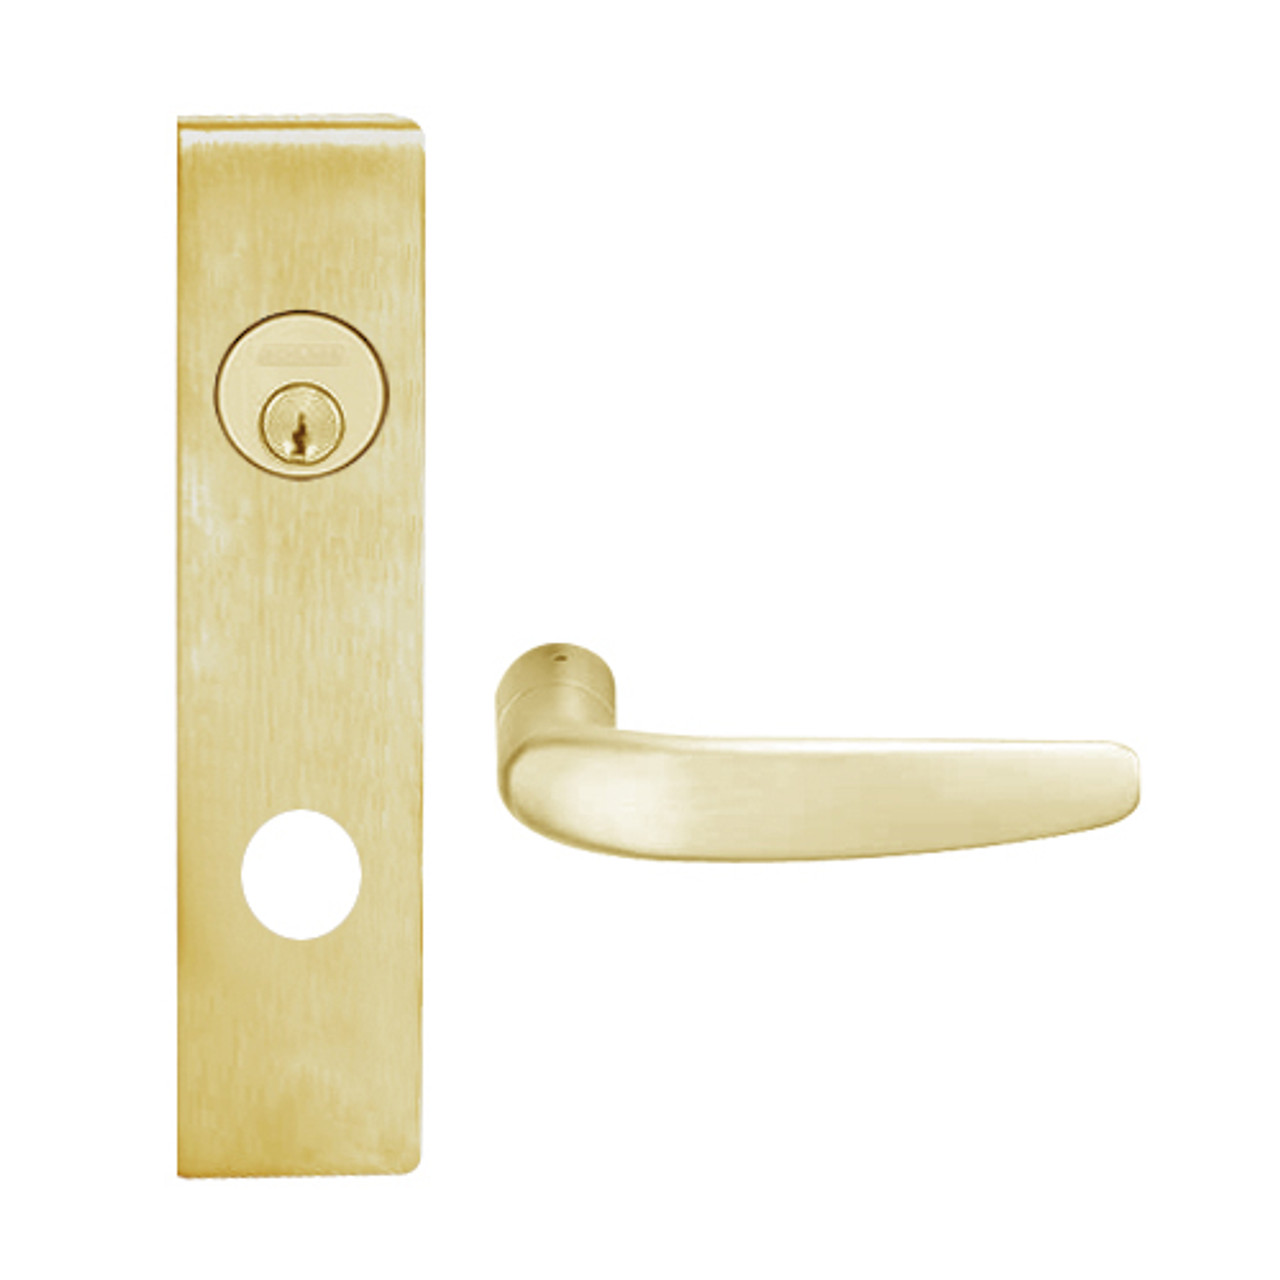 L9026P-07L-606 Schlage L Series Exit Lock with Cylinder Commercial Mortise Lock with 07 Cast Lever Design in Satin Brass